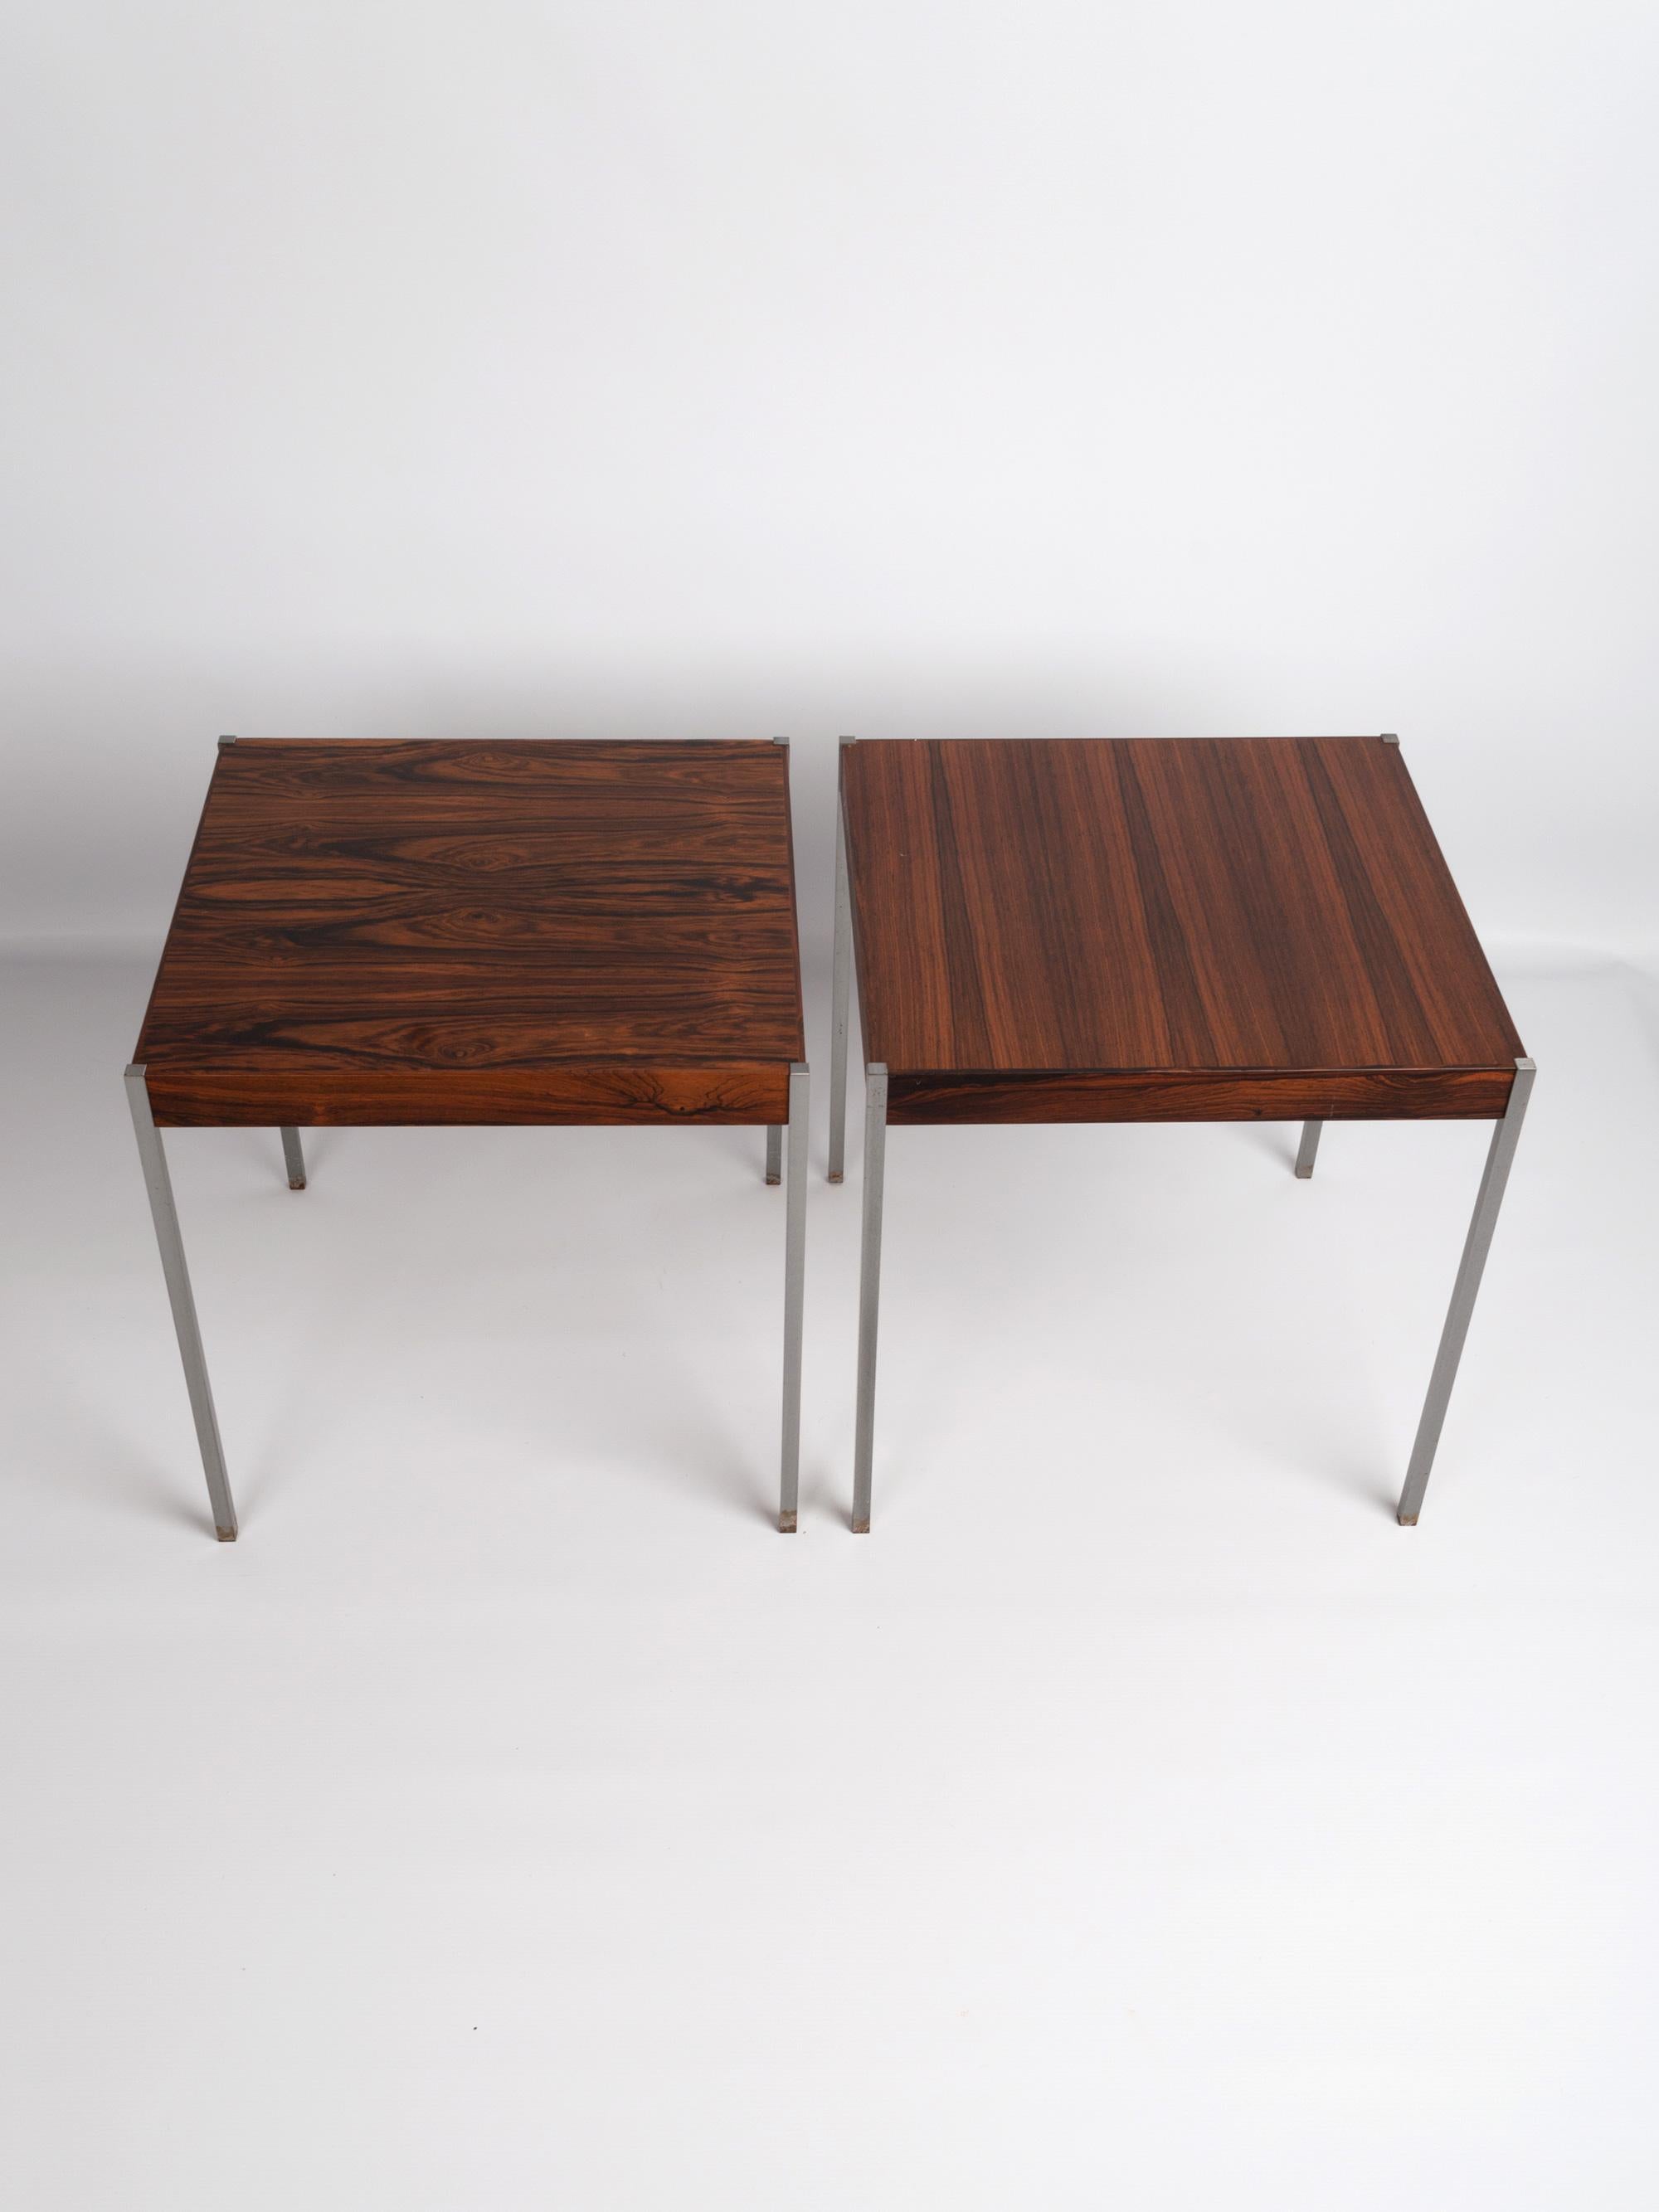 A near pair of rosewood and steel side tables by Uno & Östen Kristiansson for Luxus Vittsjö. Sweden, circa 1960.
In excellent vintage condition commensurate of age.